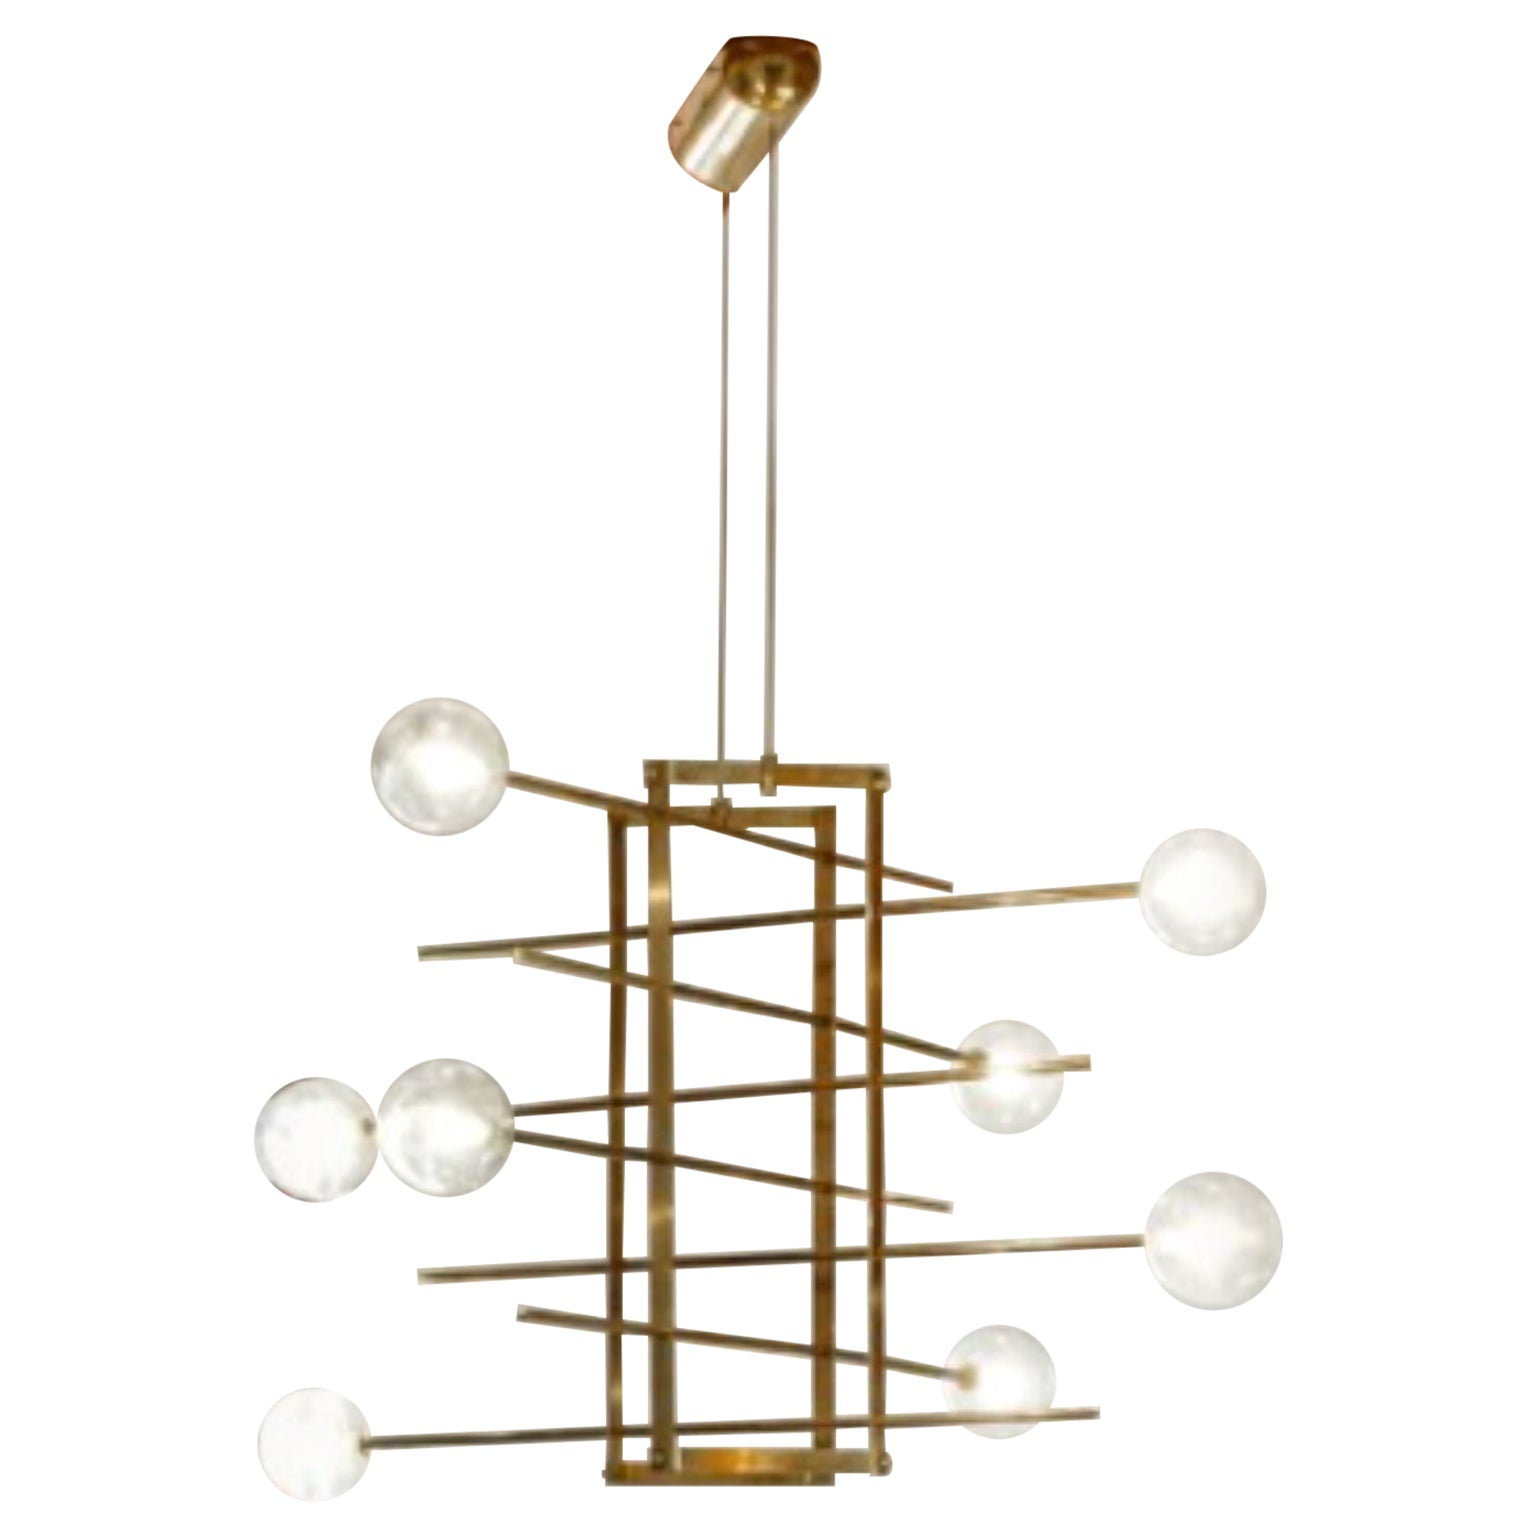 Modular Chandelier 8 Lamps by Contain For Sale